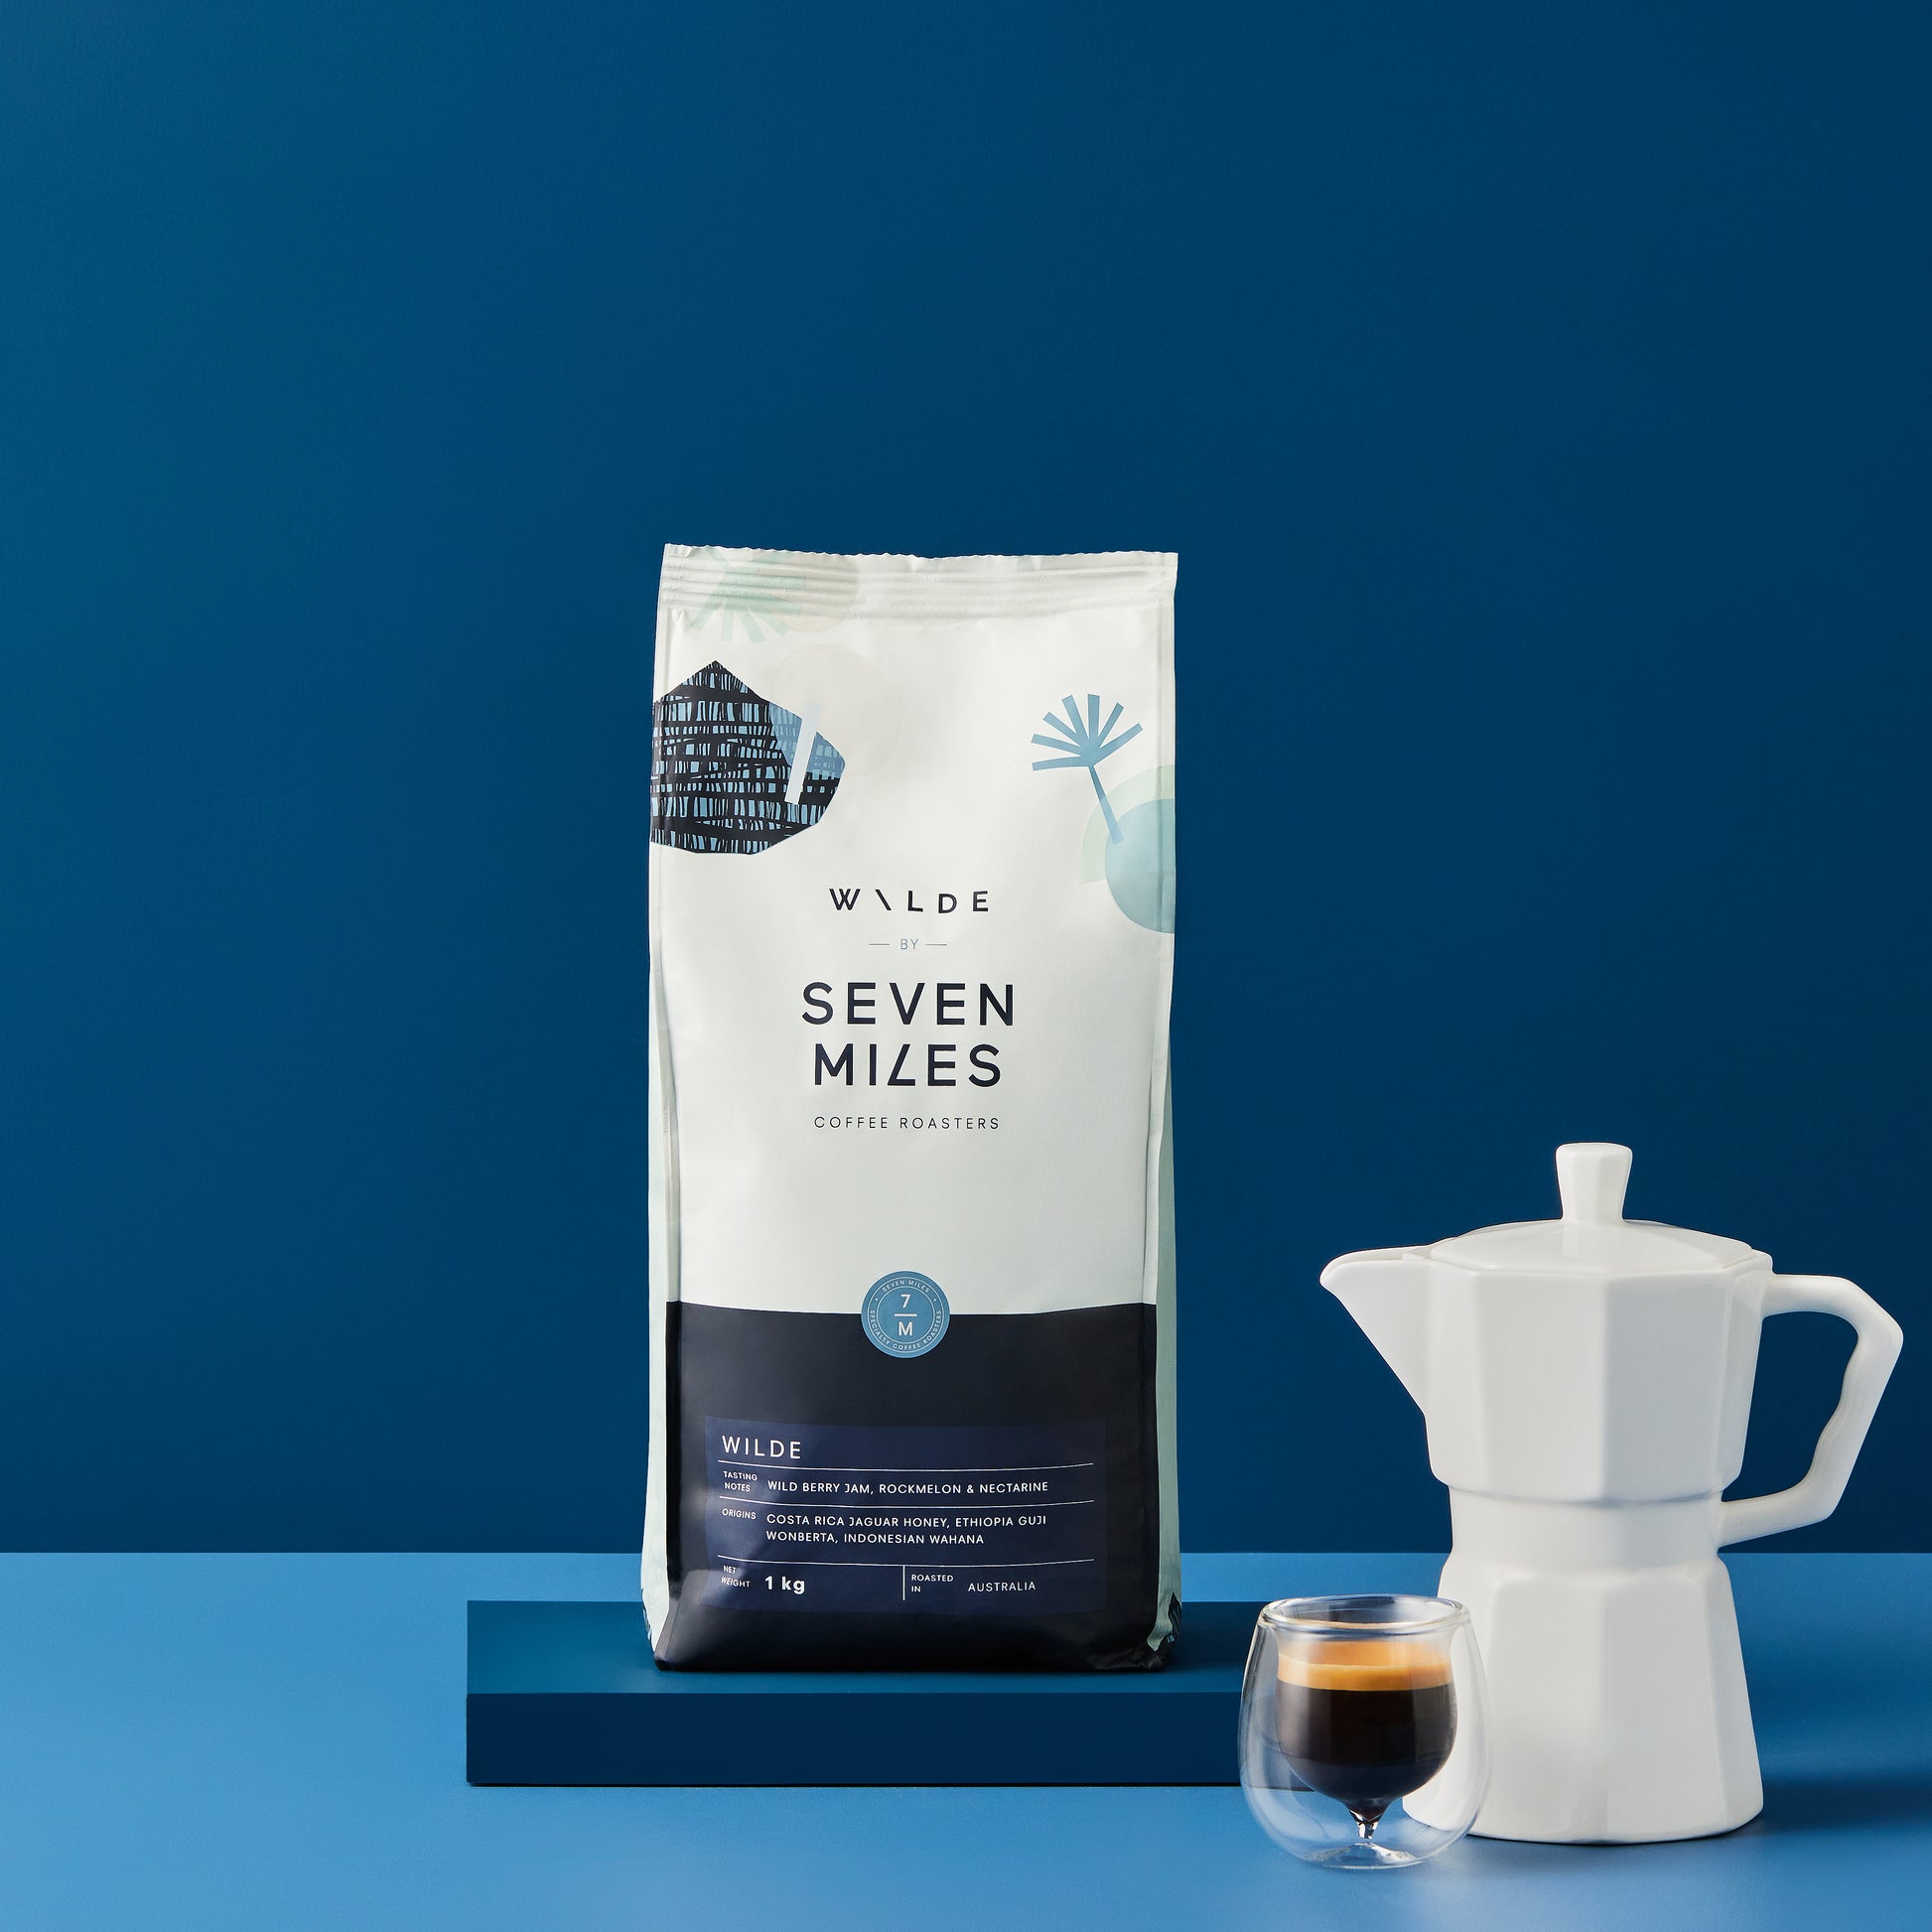 Seven Miles Coffee Roasters Wilde blend 1kg on a table next to a mokka pot and a glass cup with an espresso shot.